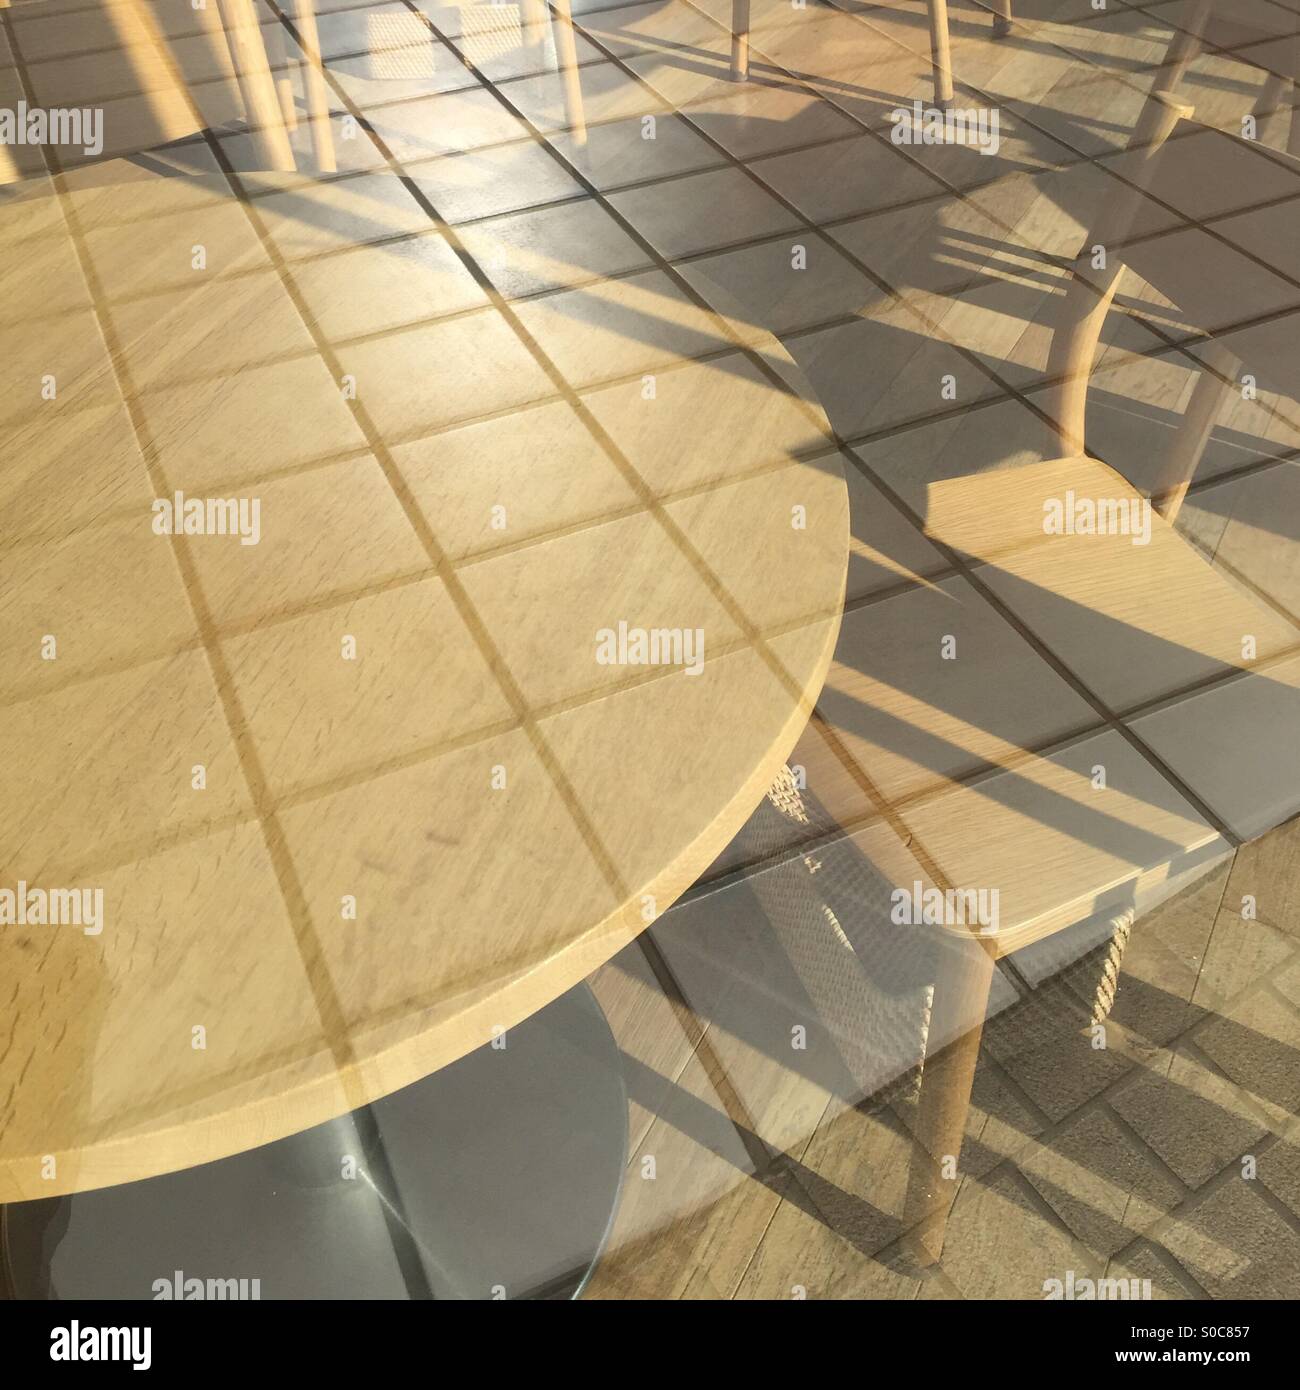 Wooden table and chair seen through glass wall reflecting outdoor tile floor. Stock Photo